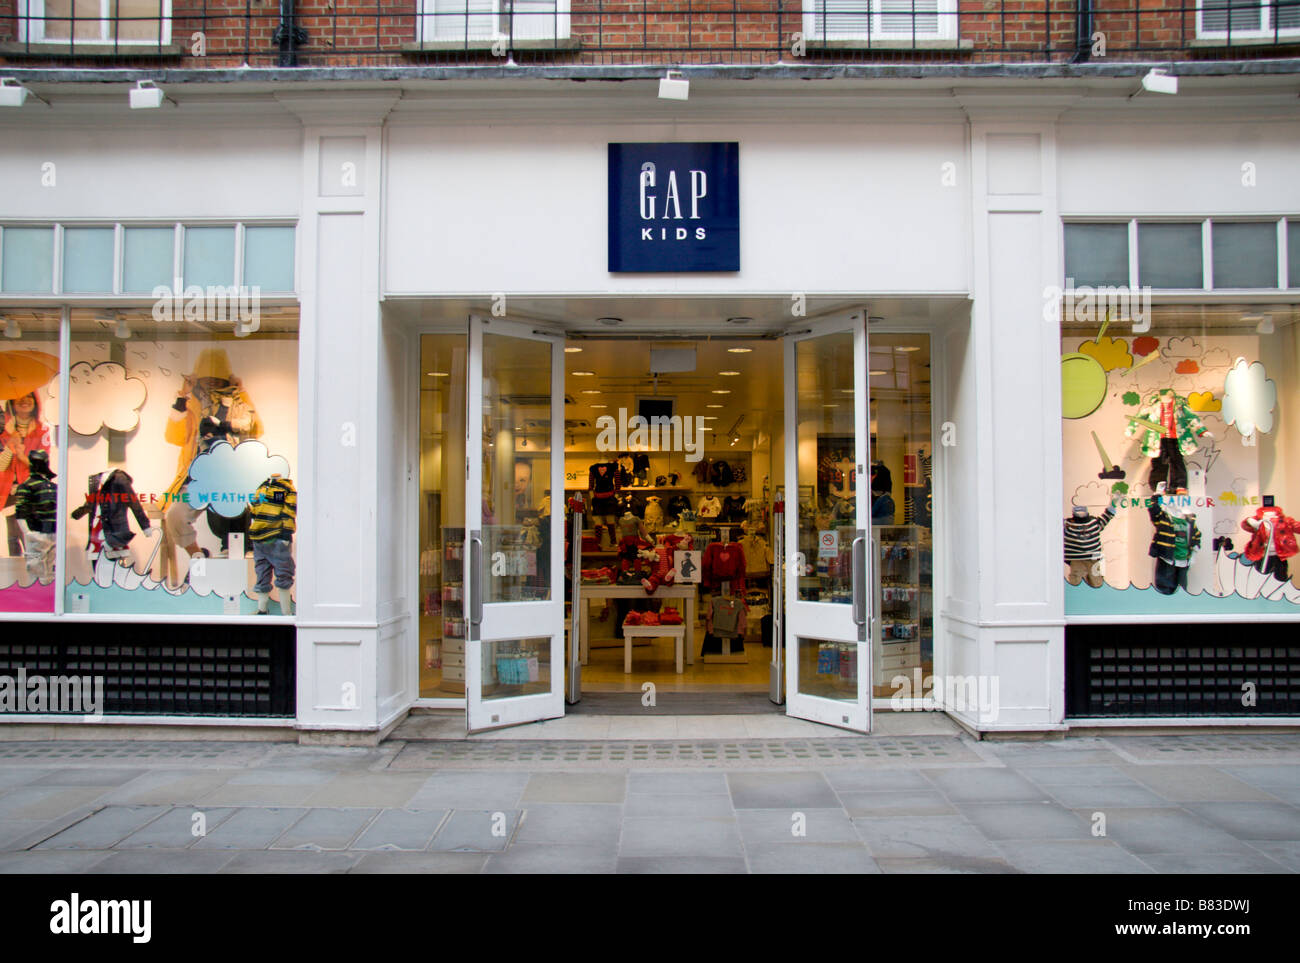 The shop entrance to the Baby Gap clothing shop in Covent Garden ...